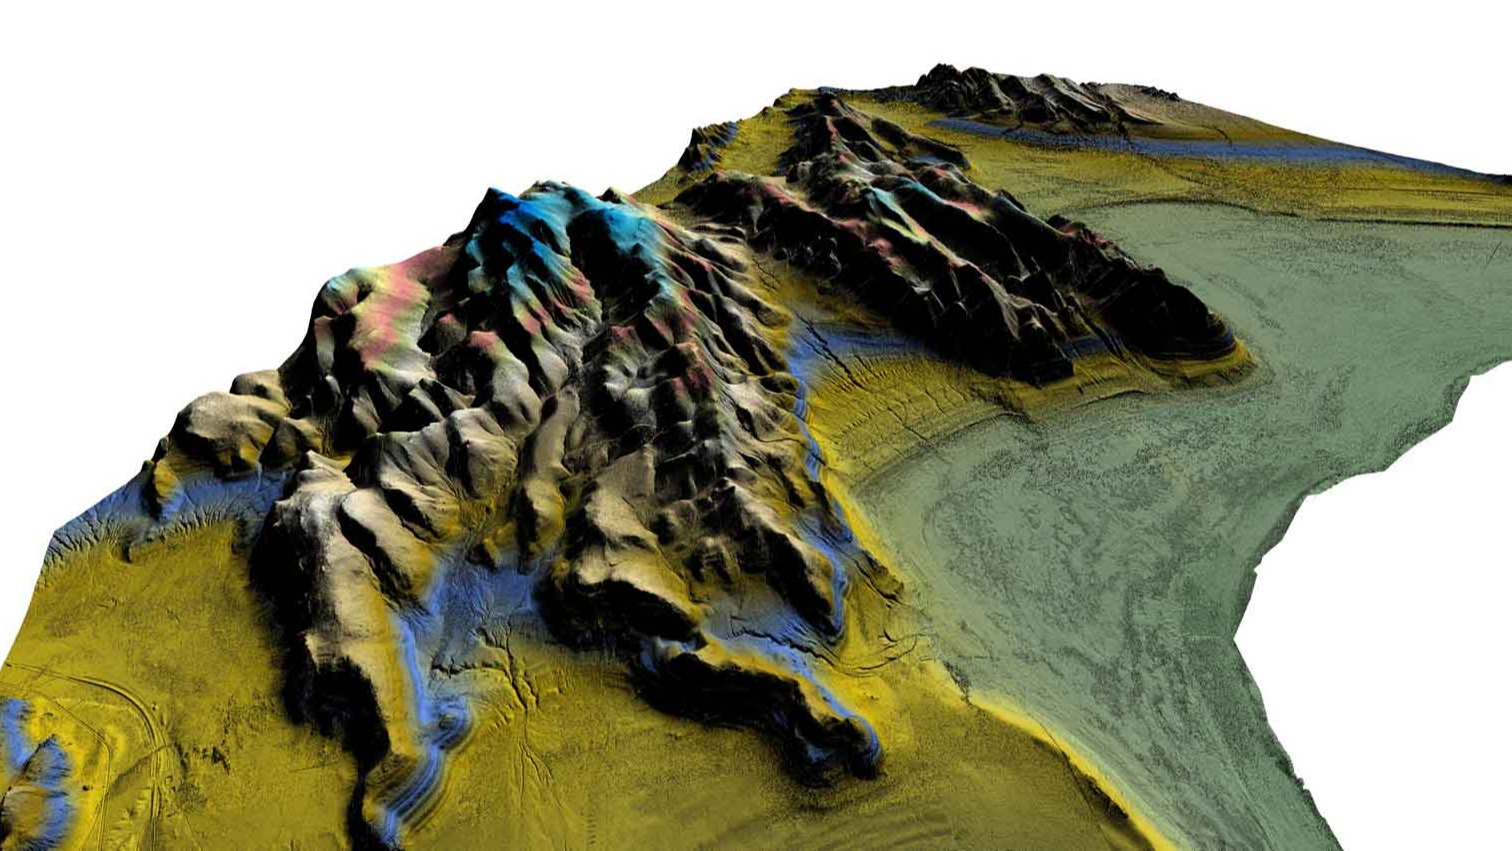 large 3D model created with drone mapping software